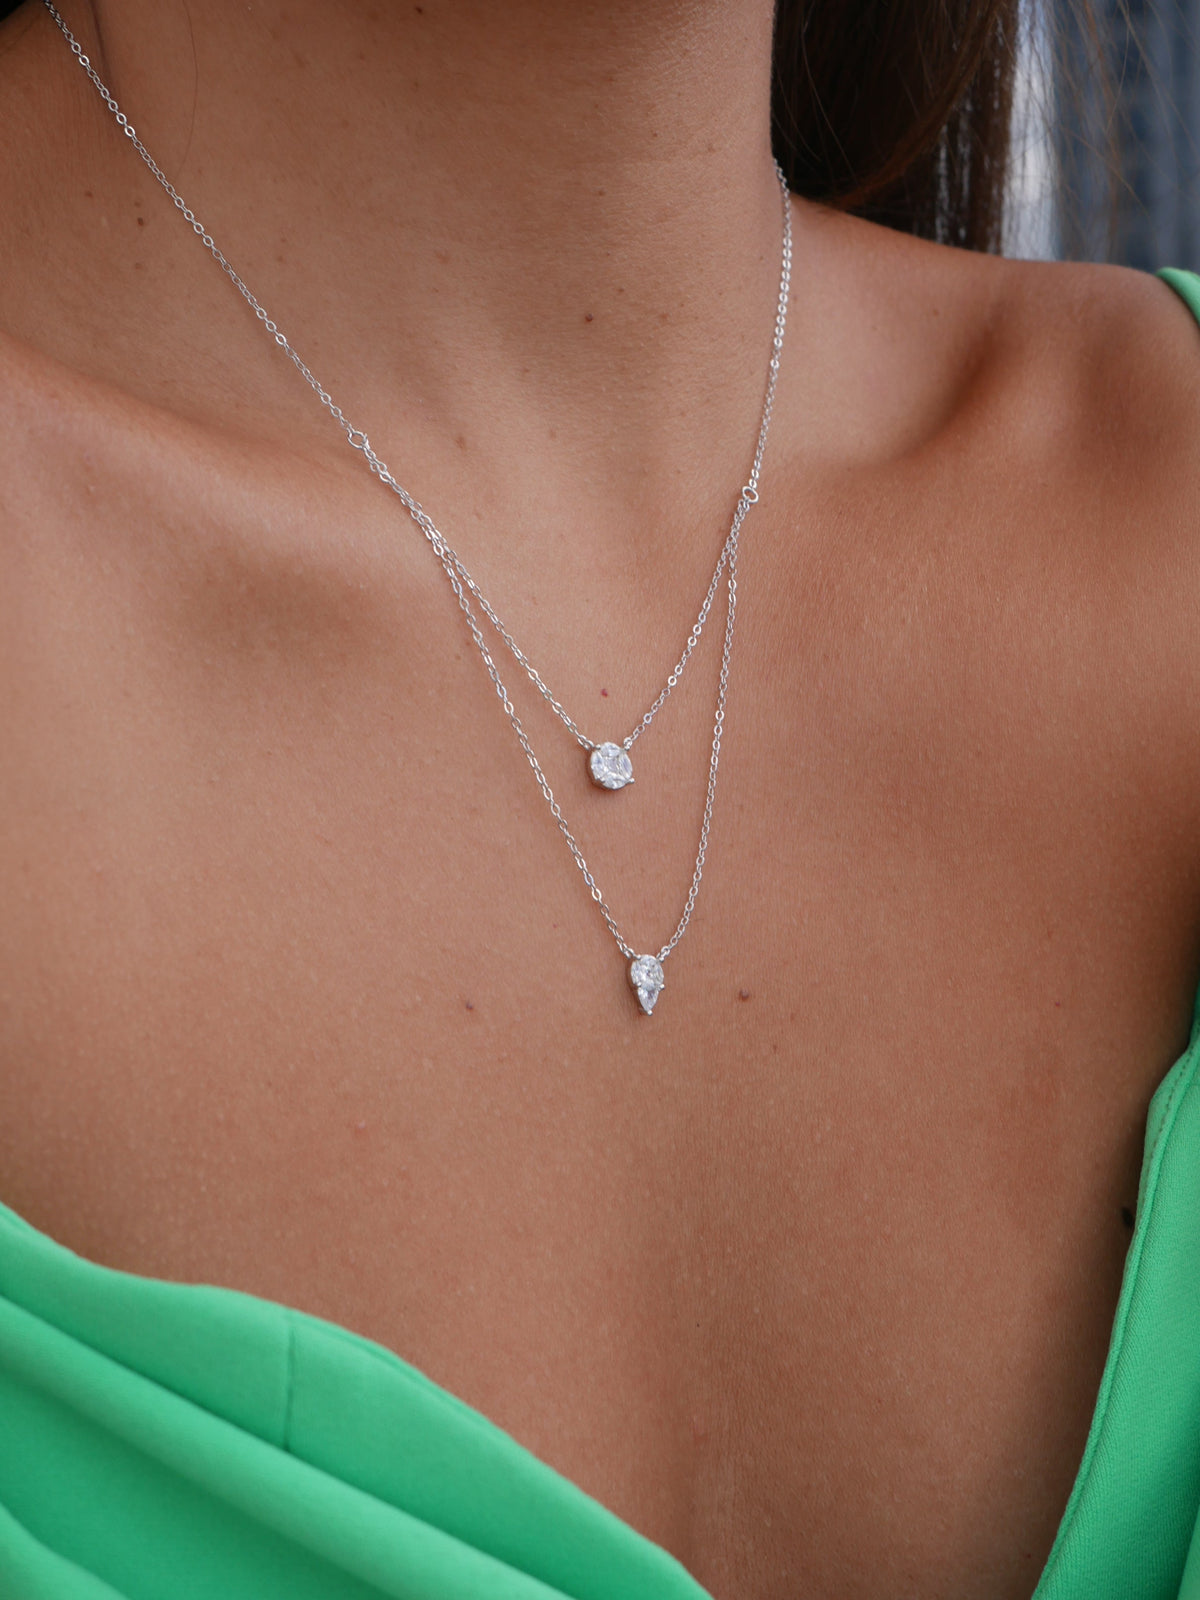 necklace, silver necklaces, layered necklaces, 925 sterling silver necklaces, jewelry, fashion jewelry, dainty necklaces, layering necklace ideas, 18 inch necklaces, double necklace, christmas gifts, birthday gifts, anniversary gifts, statement necklaces, silver jewelry, designer jewelry, tarnish free jewelry, affordable jewelry, rhinestone jewelry, rhinestone necklaces, trending on tiktok, kesley jewelry, waterproof jewelry